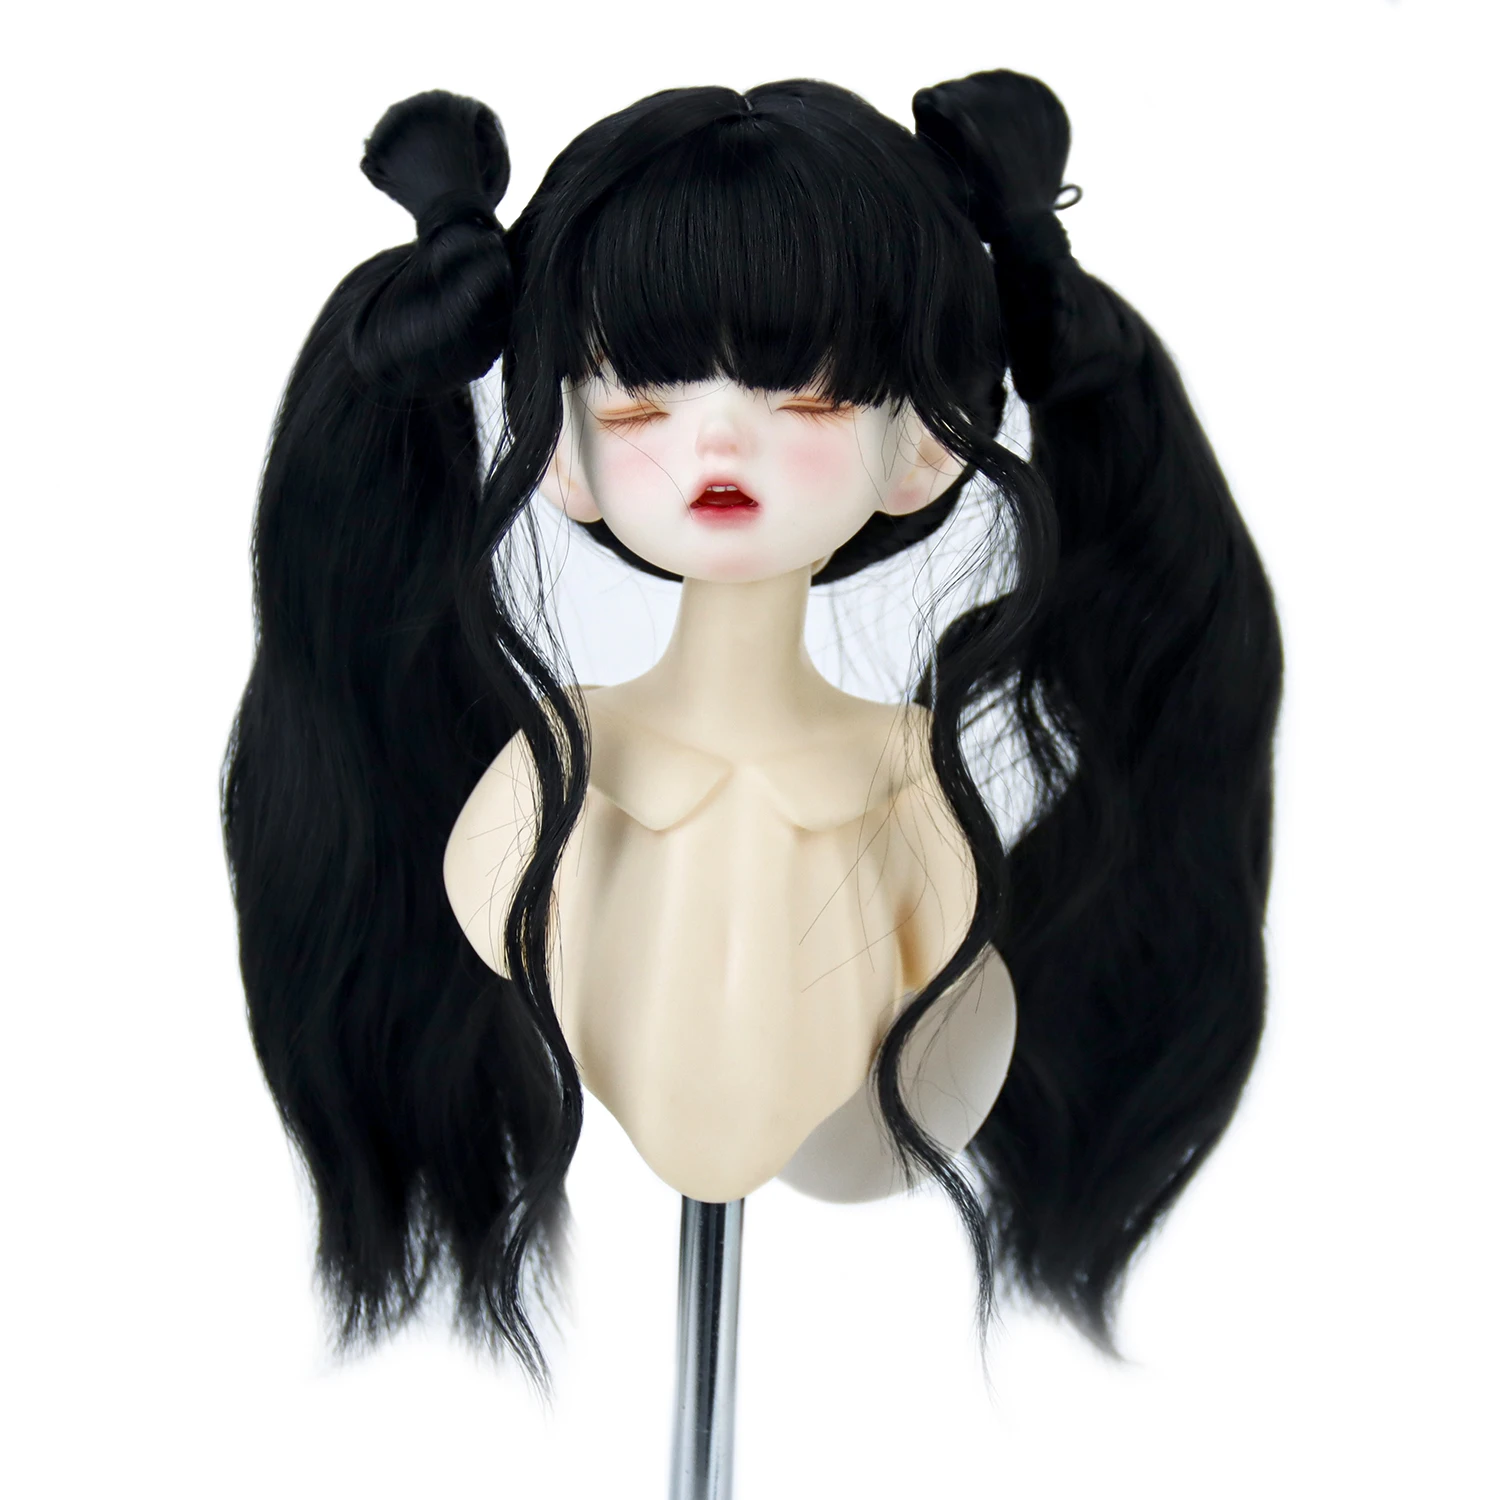 1/6 BJD Wigs Pigtails Black Braid With Bangs Wavy 6-7'' MSD Doll Accessories Heat Resistant Fiber Tress Doll Hair DIY Gifts